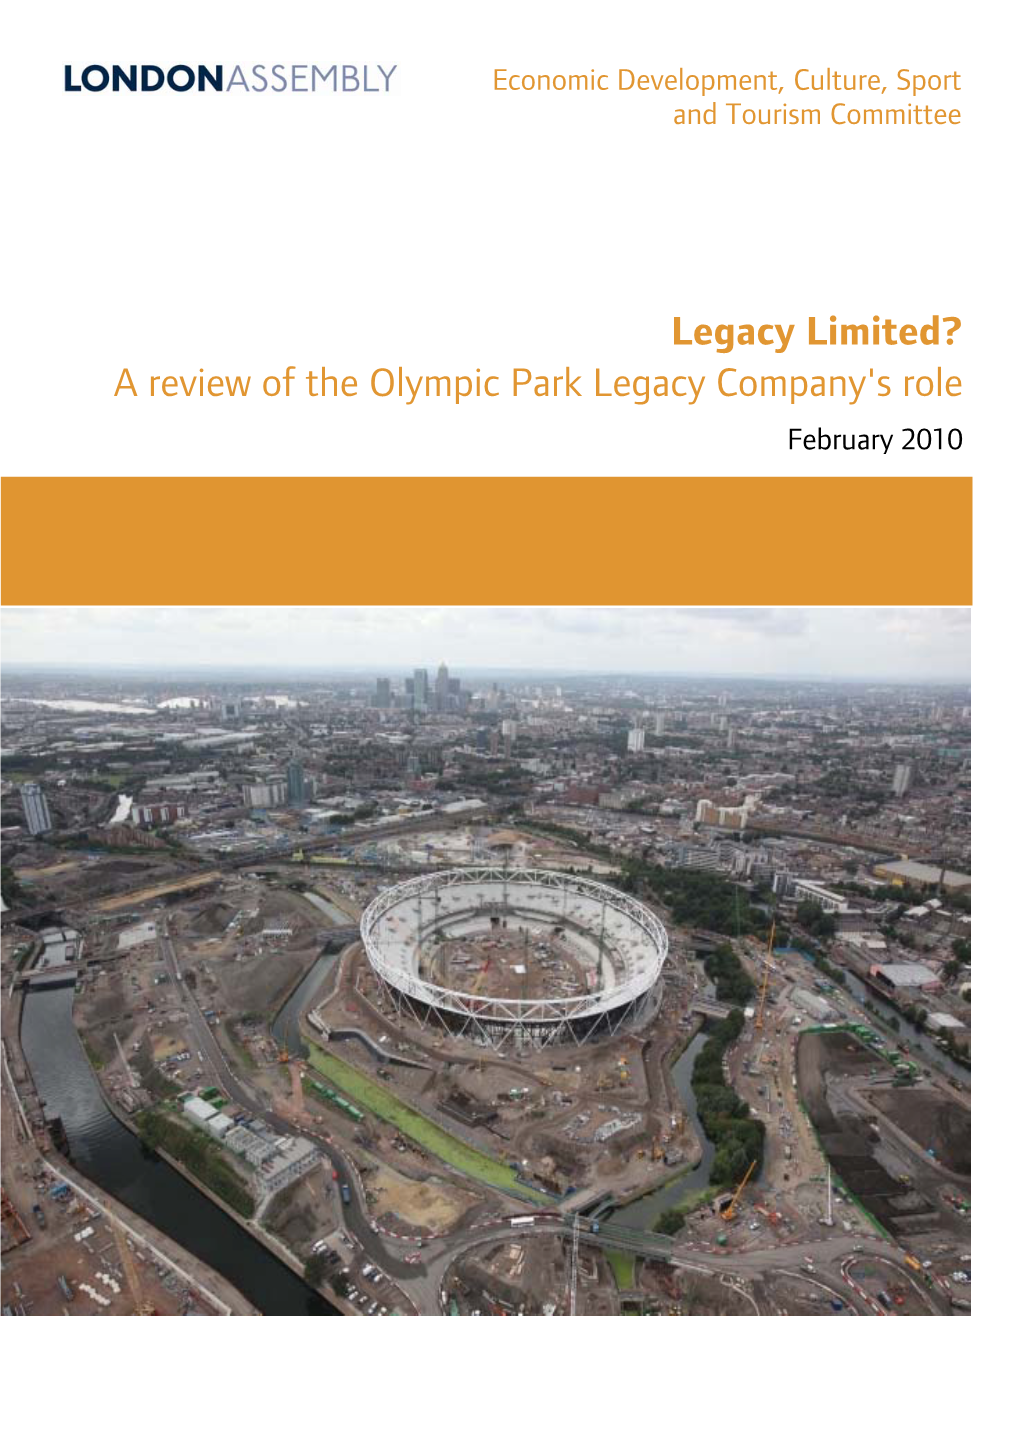 A Review of the Olympic Park Legacy Company's Role February 2010